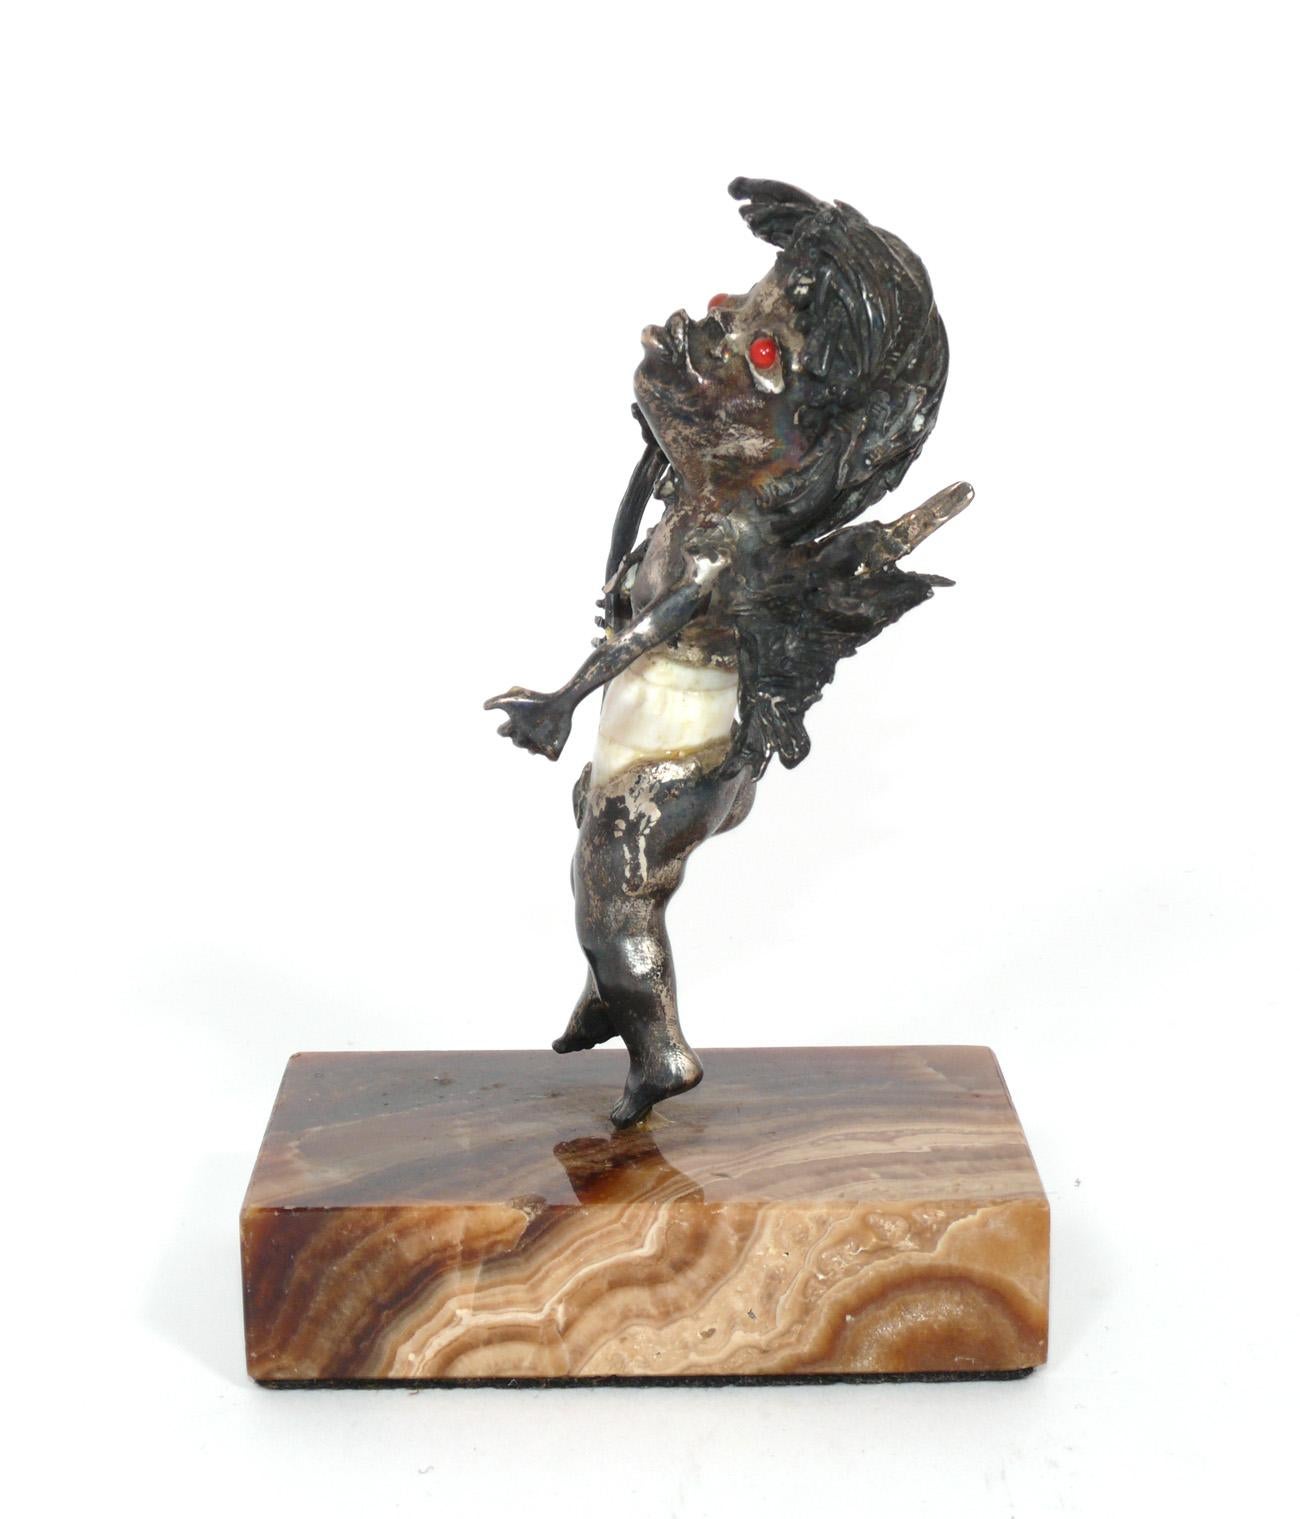 Mischievous creature sculpture, by Aurelio Teno, unsigned, Spanish, circa 1960s. Constructed of a seashell, silver or silvered bronze, and semi precious stone eyes on an agate base. Retains warm original patina.